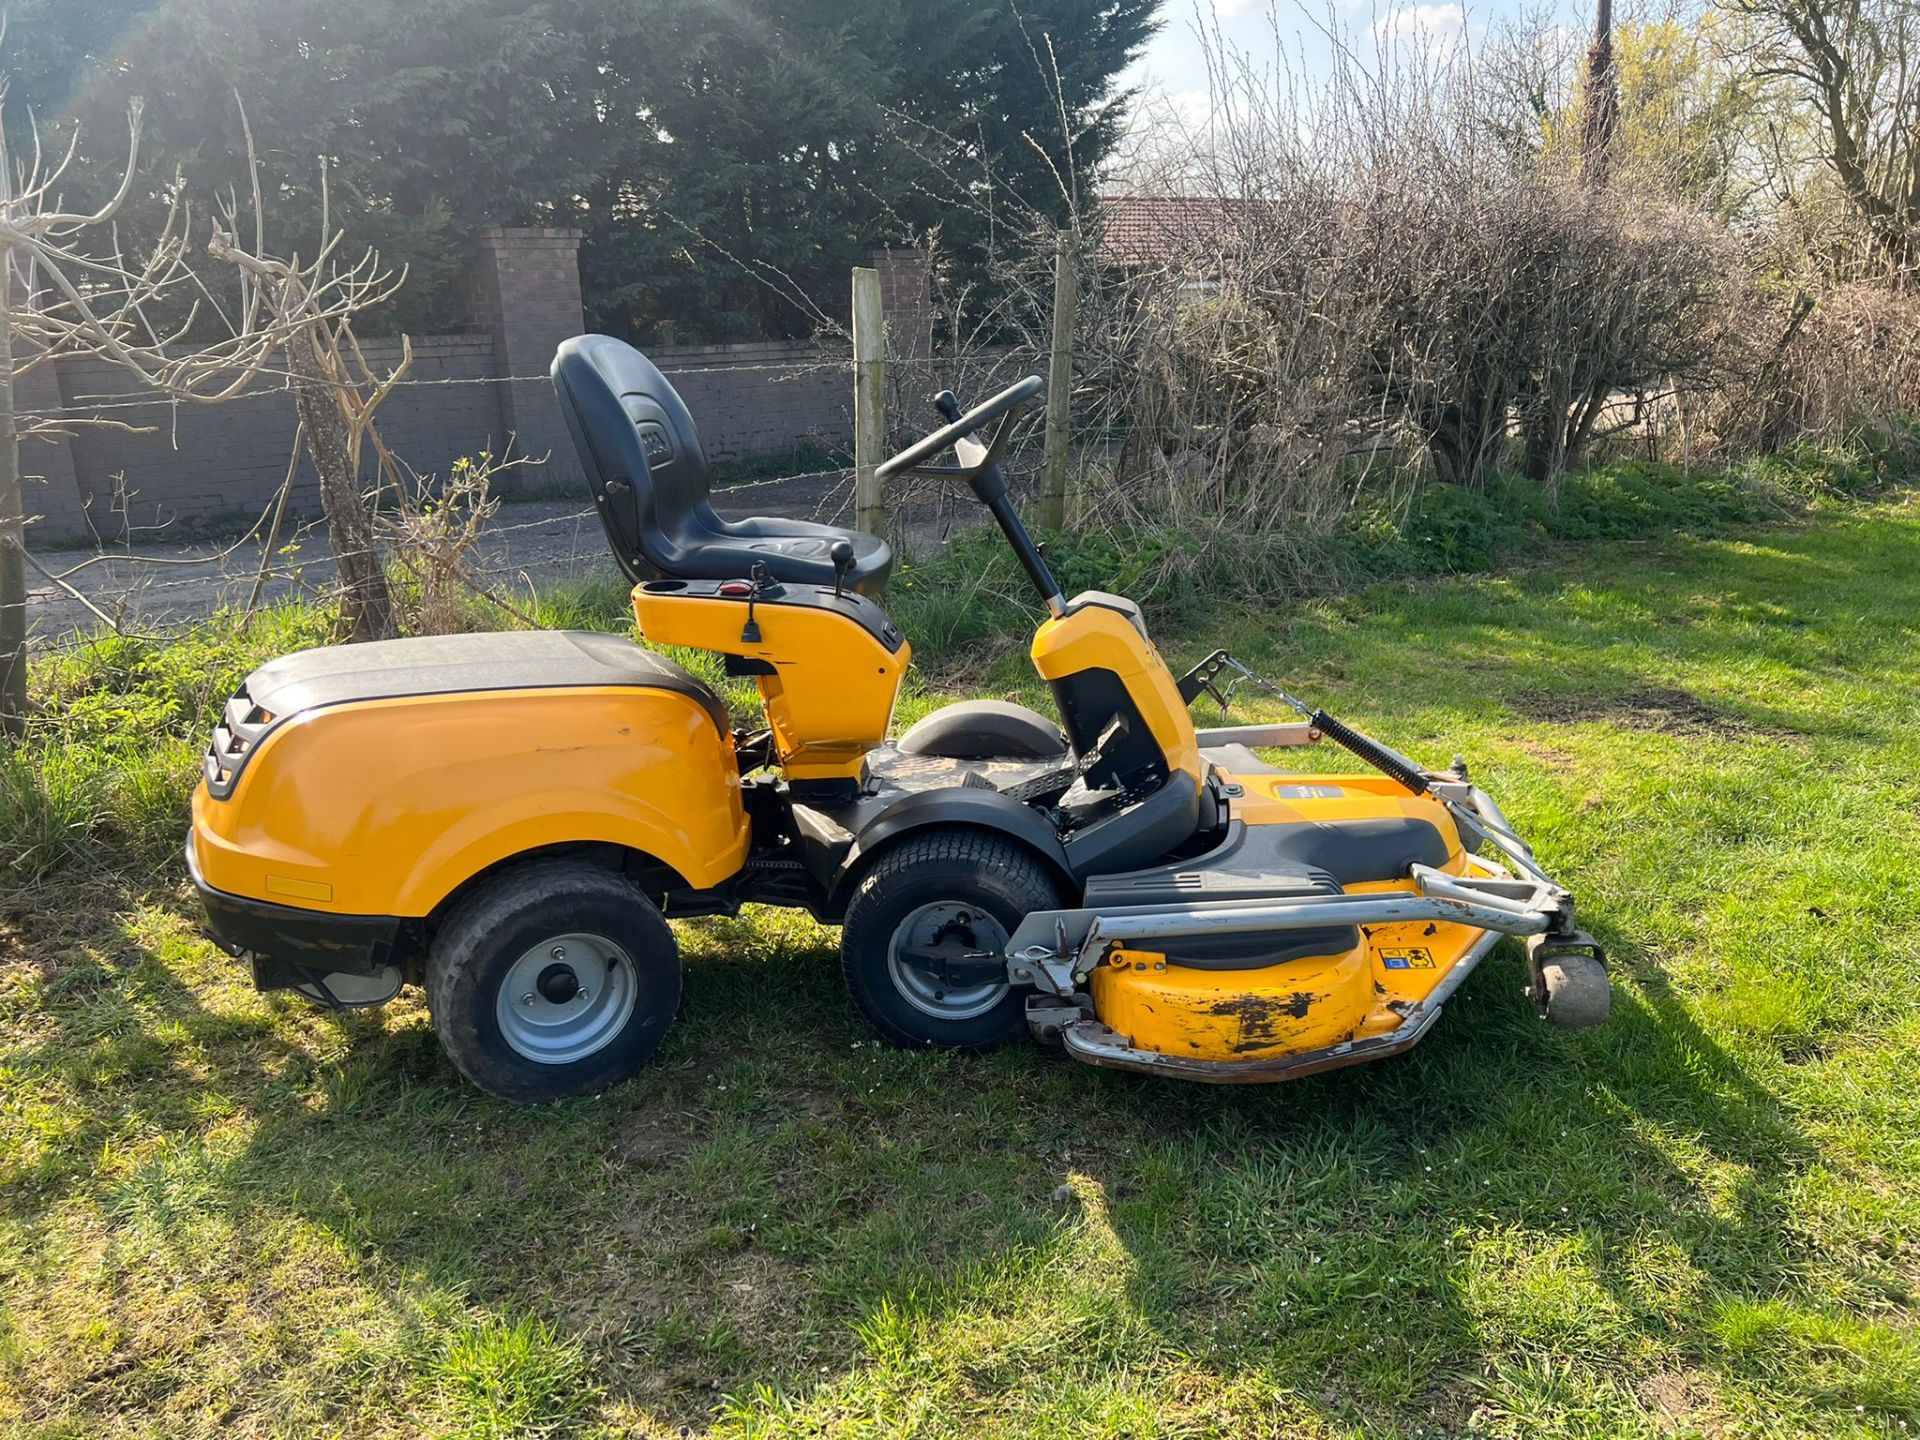 STIGA PARK 540 DPX RIDE ON LAWN MOWER DIESEL ENGINE, Runs drives and cuts, Year 2016 *PLUS VAT*